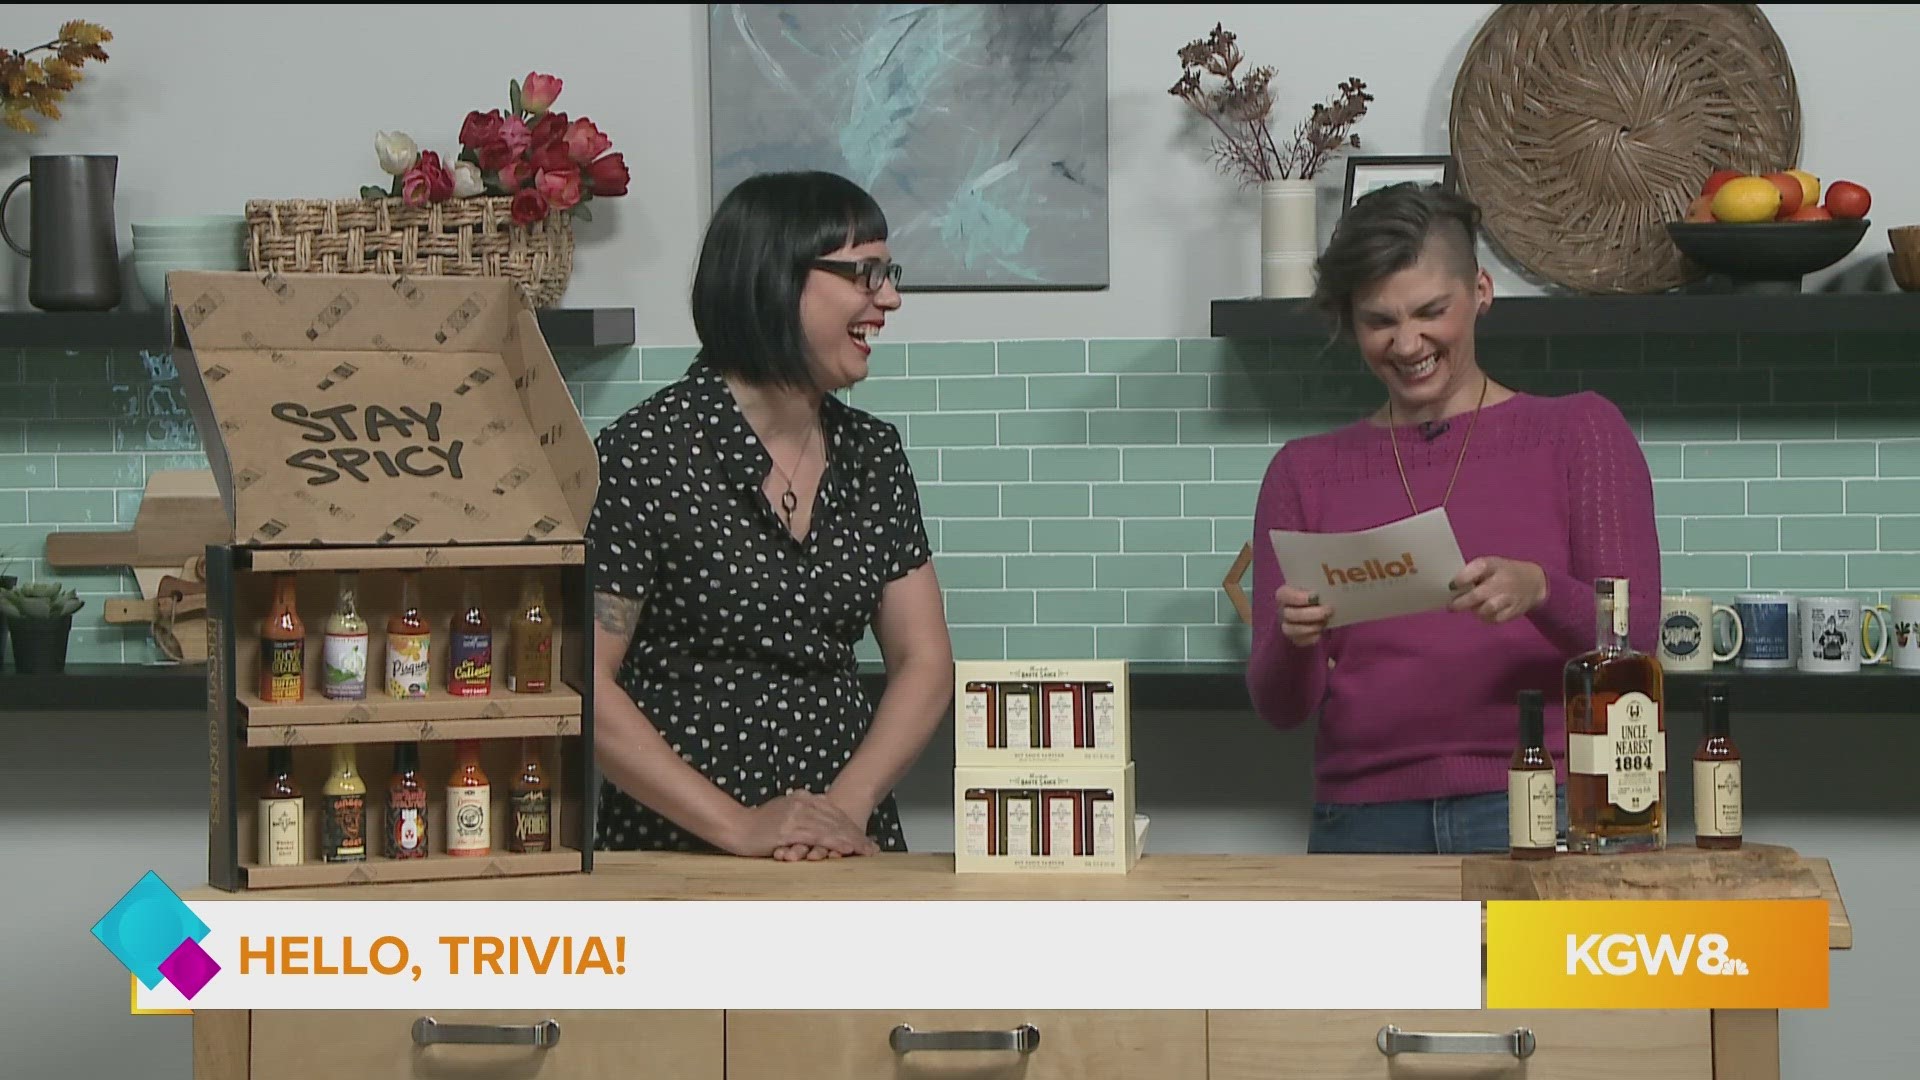 Sarah Marshall, owner of Marshall's Haute Sauce, plays Hello, Trivia! with a sample of haute sauce on the line